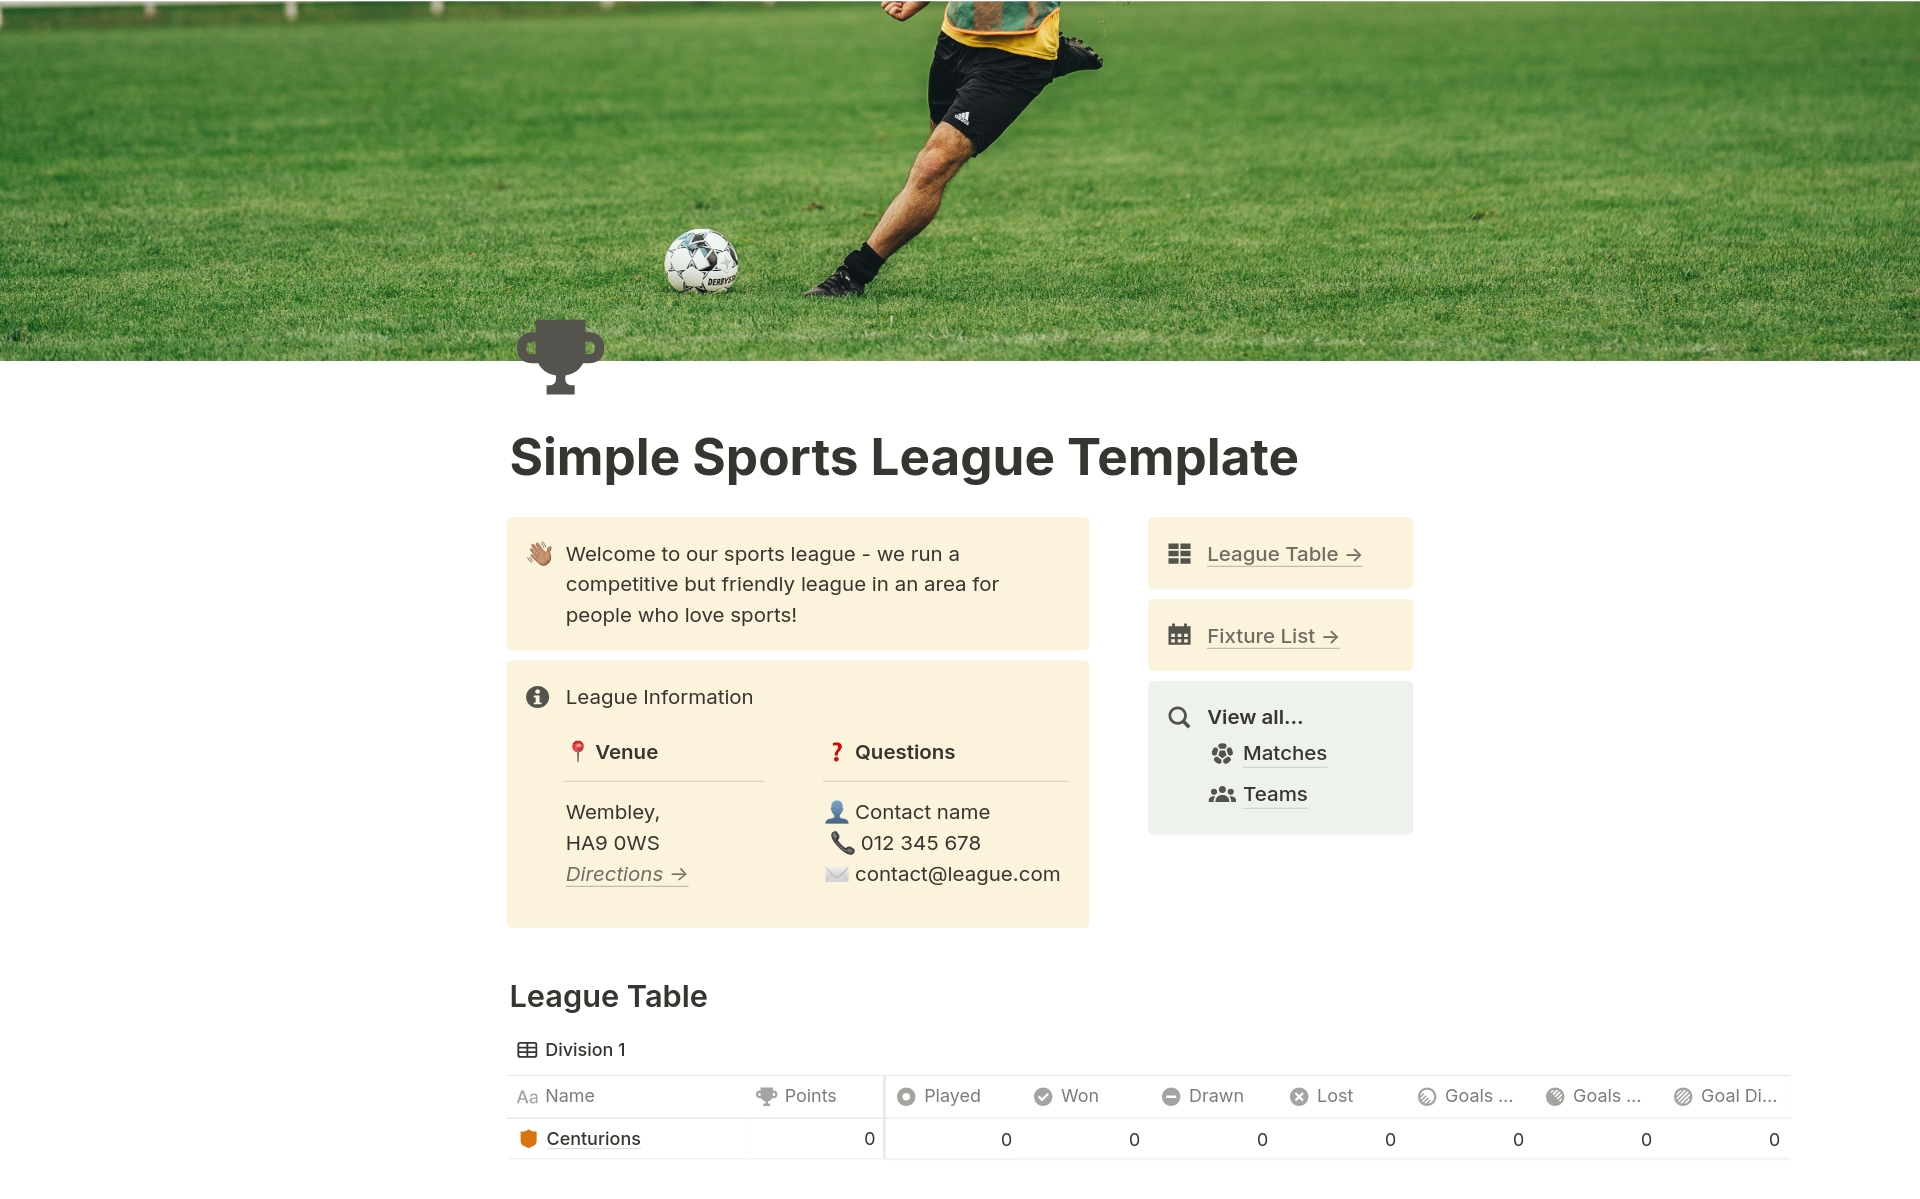 Use this basic sports league template for easy league management, quick setup and easy updates for your teams & players.